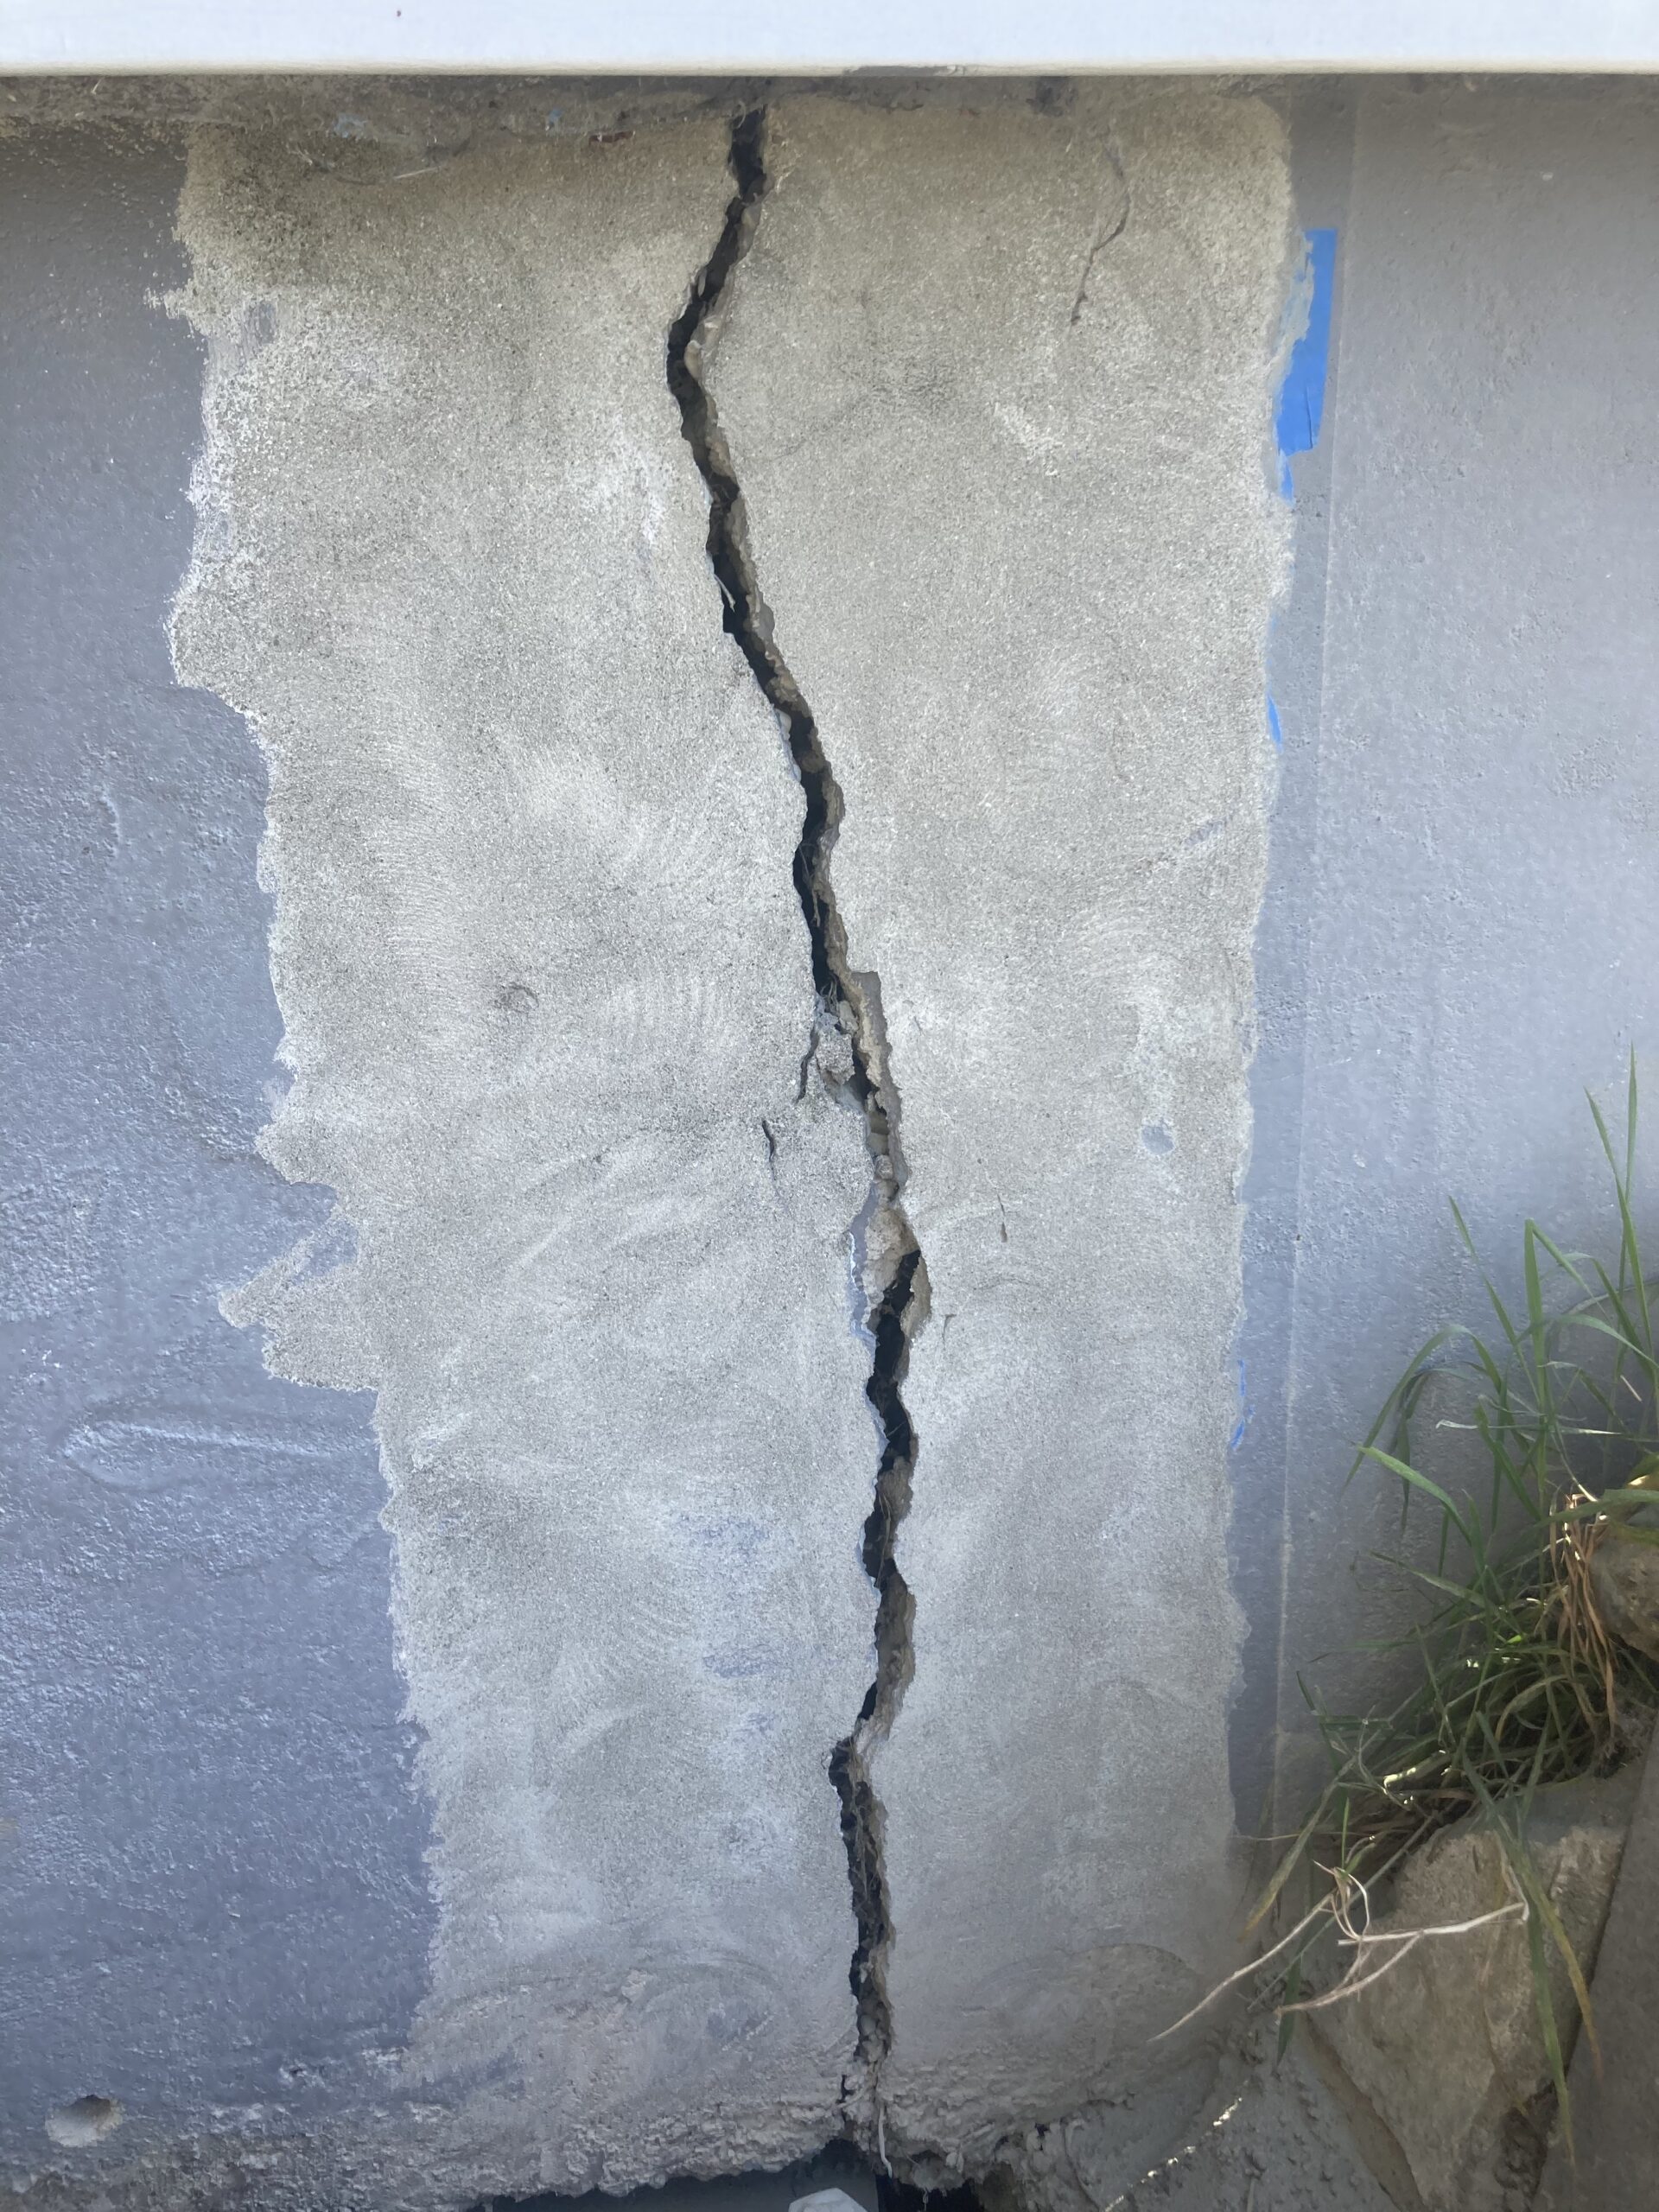 Rebar corrosion, deteriorated concrete, and soil settlement cause cracks in your foundation | R&R Specialist Crack Refinement & Repair Services